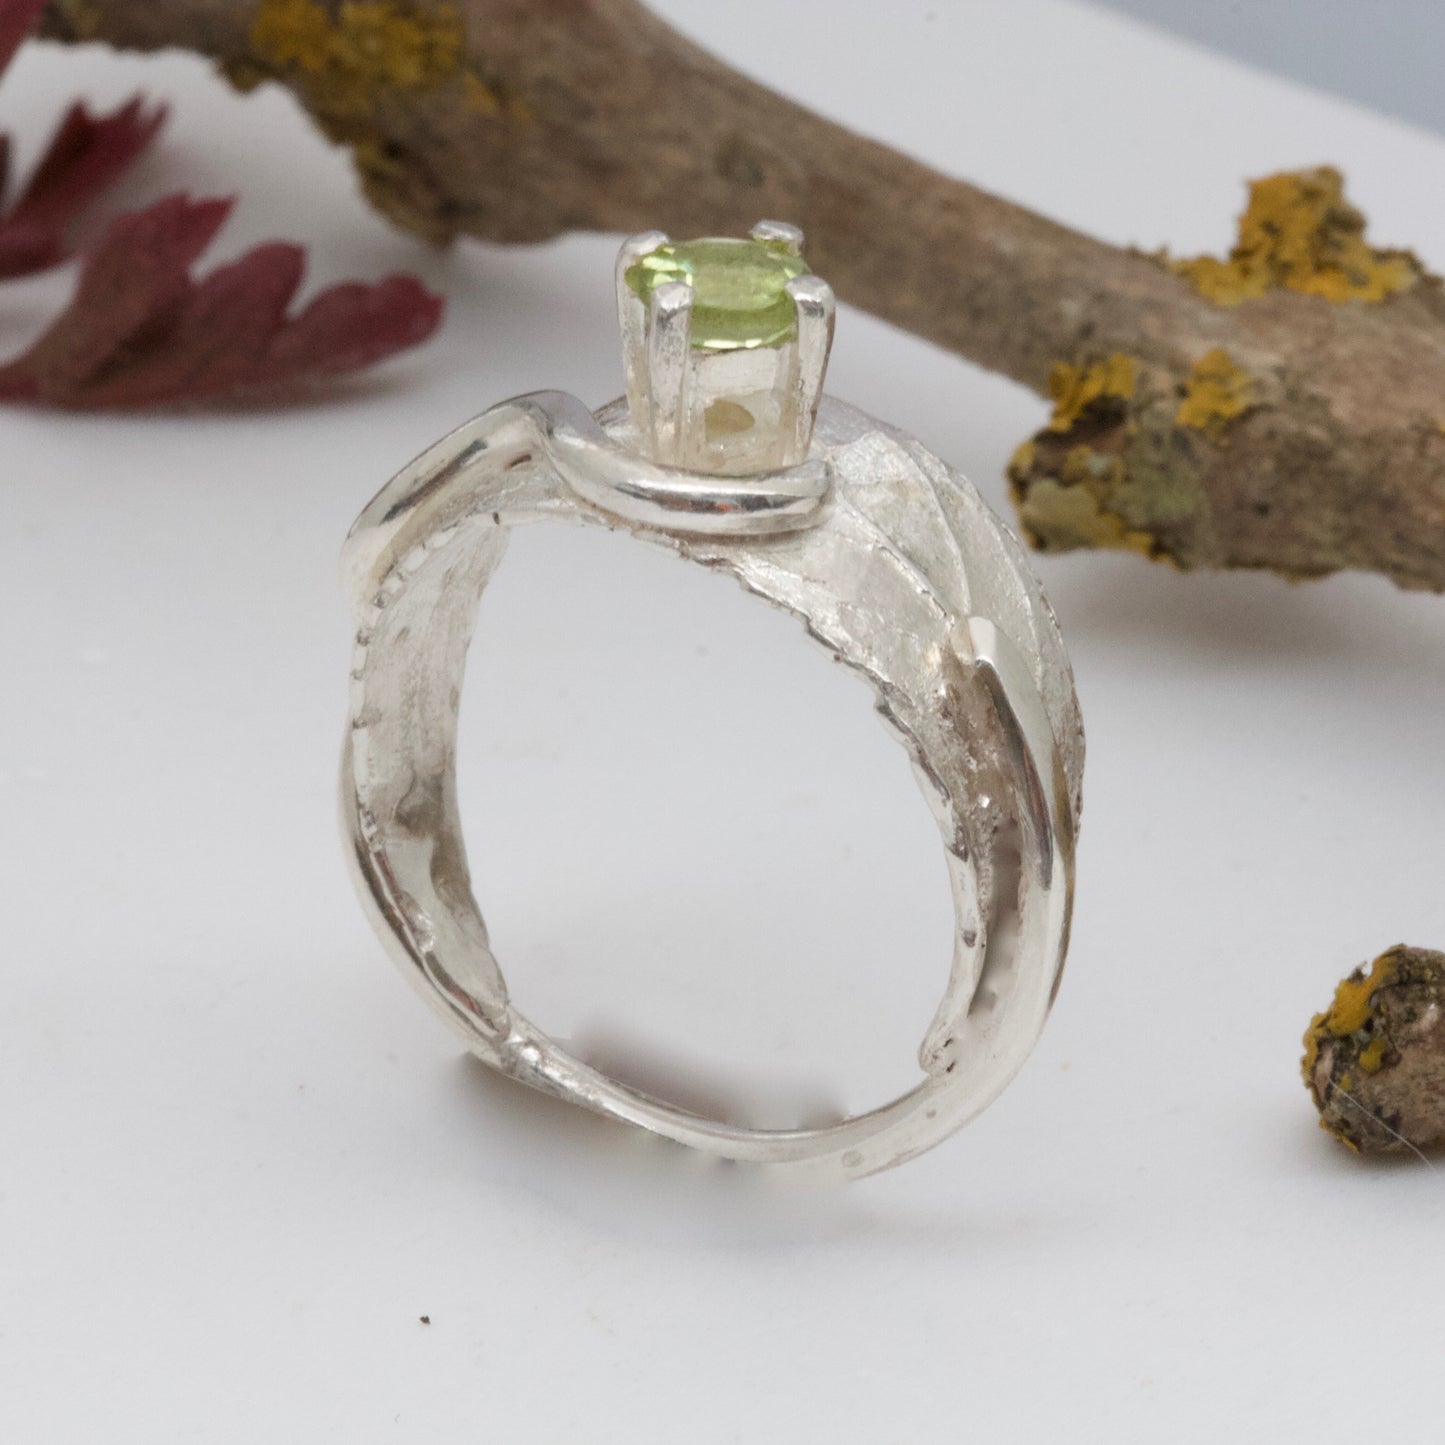 Silver Leaf Ring with Peridot